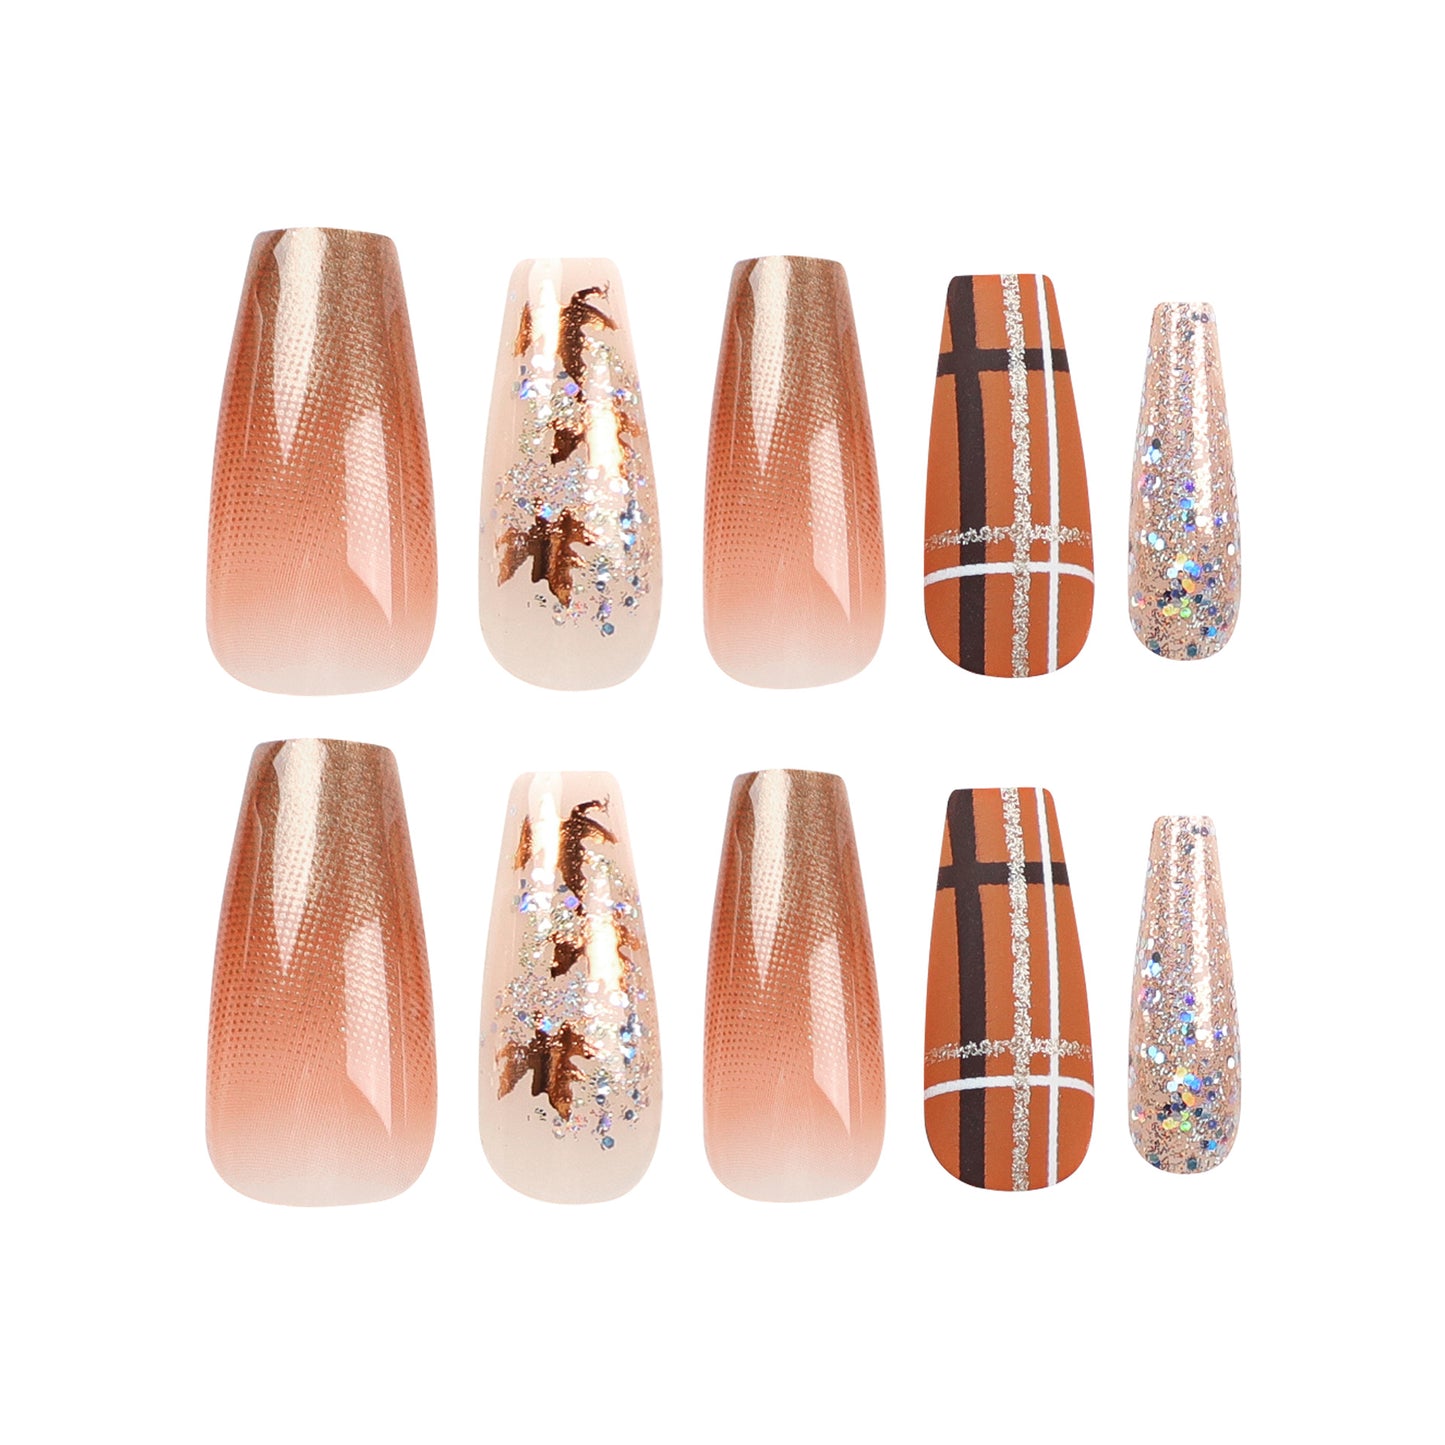 Maple leaf sequins Press on nails false nails with healthy glue tool DIY nails wholesale good price